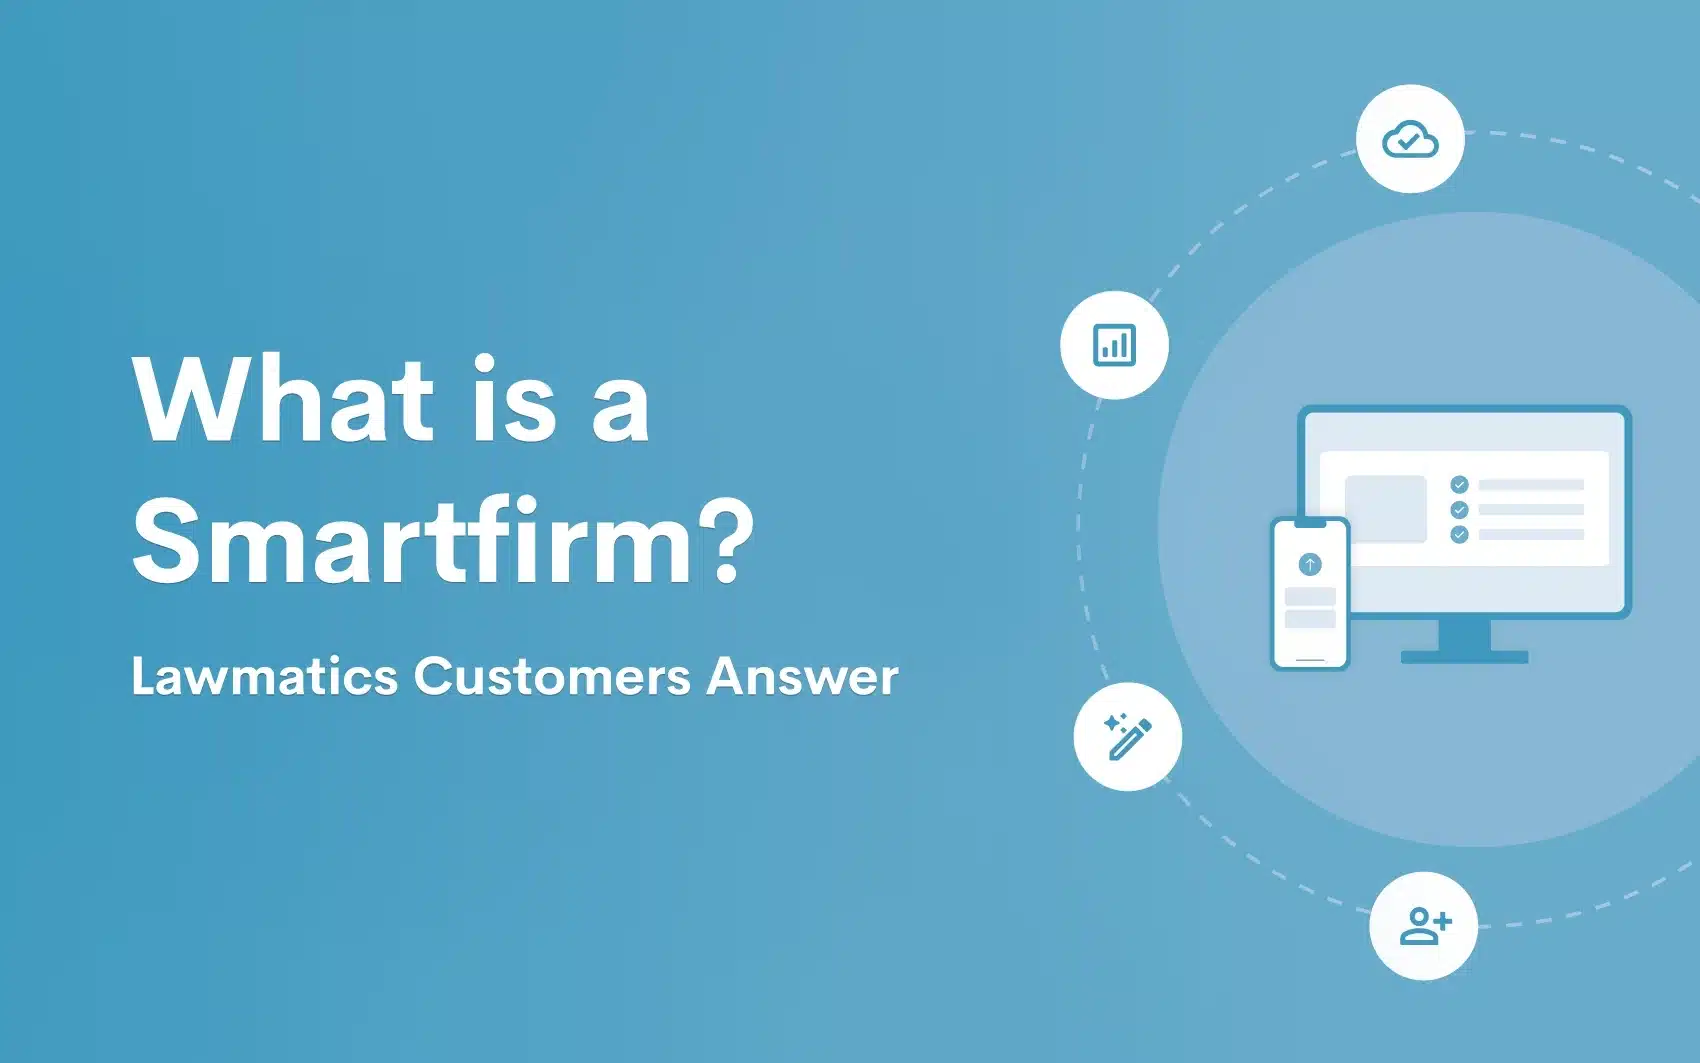 What is a Smartfirm? Lawmatics Customers Answer